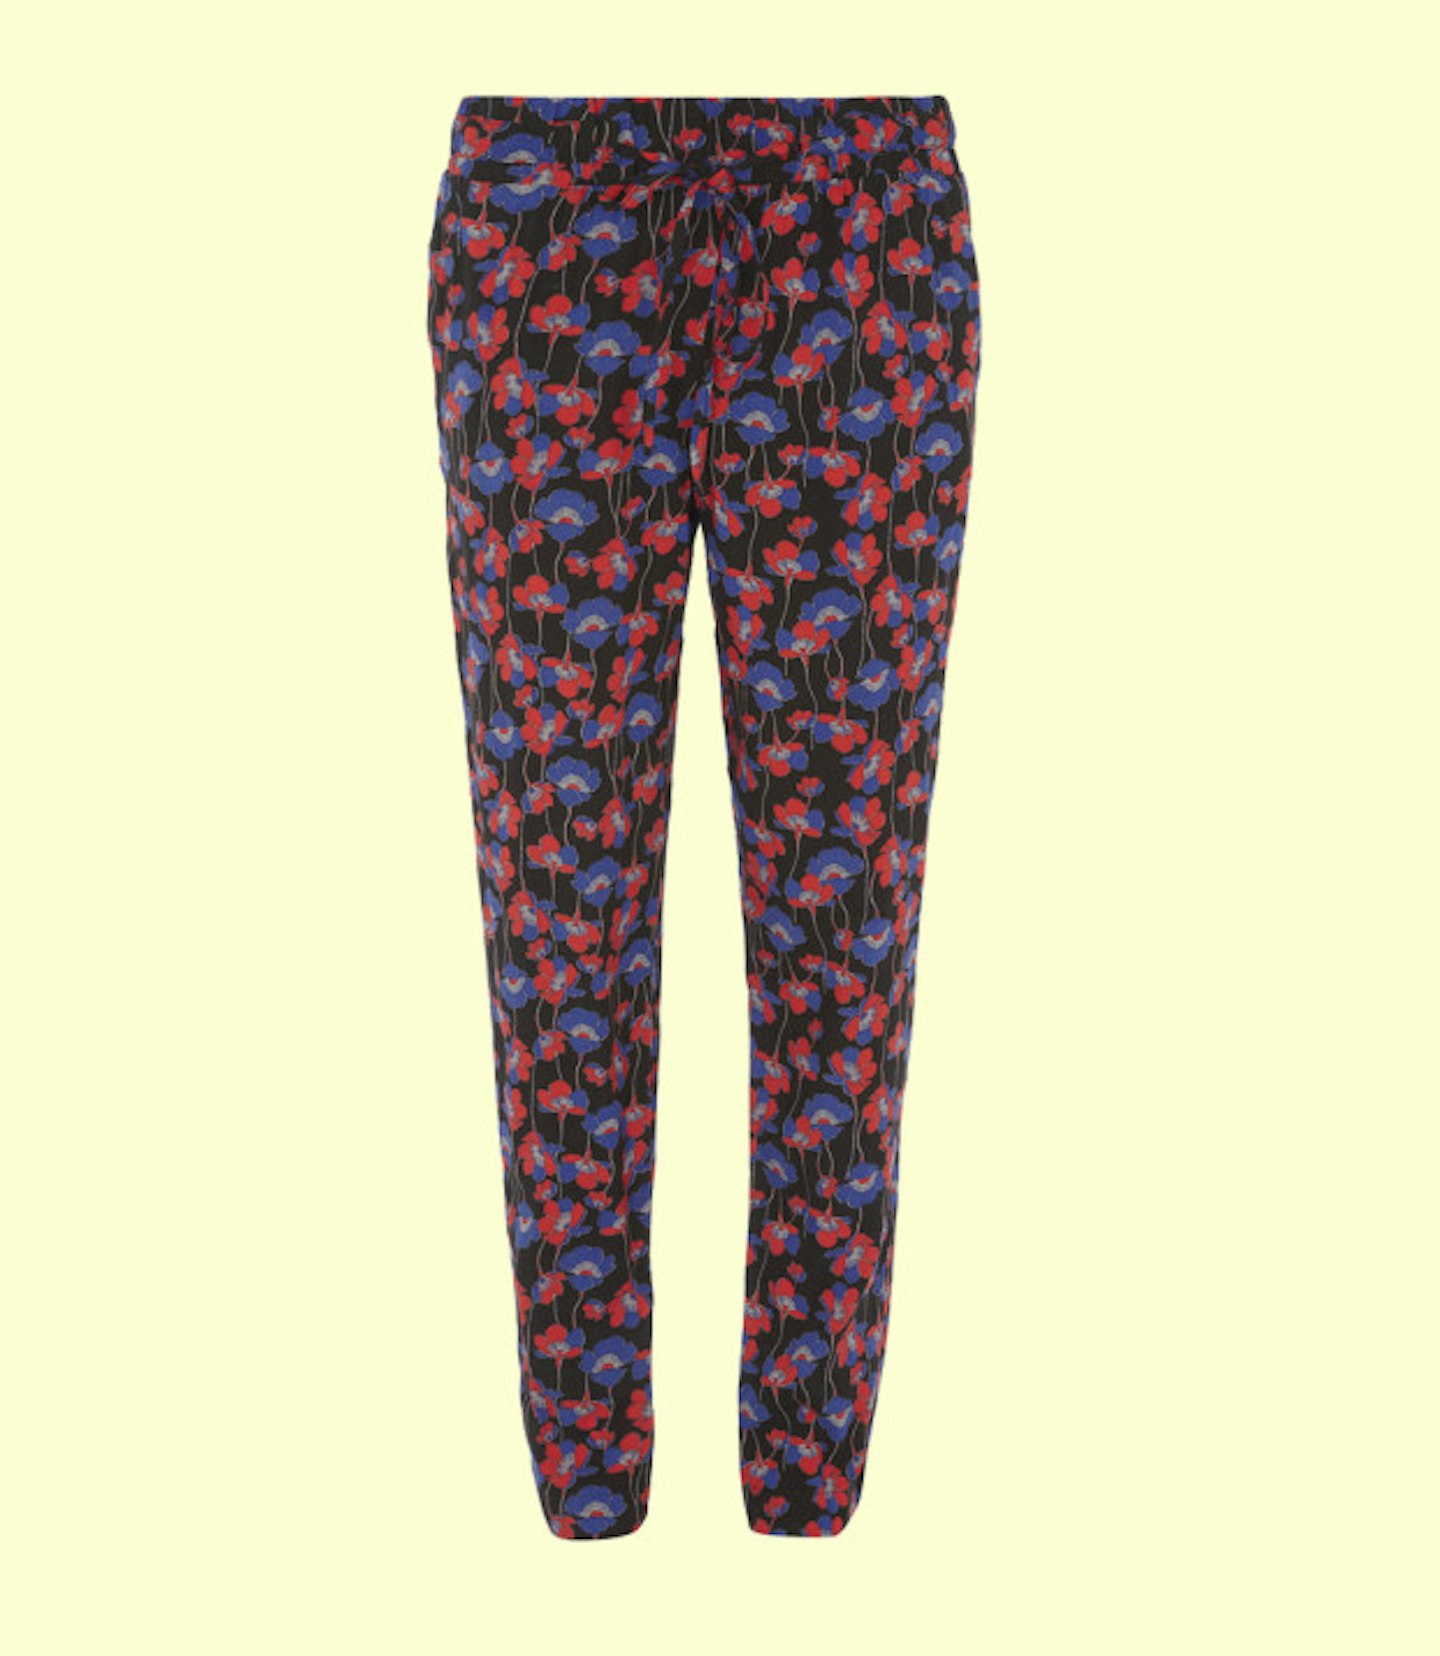 oscars-shopping-dorothy-perkins-blue-red-poppy-trousers